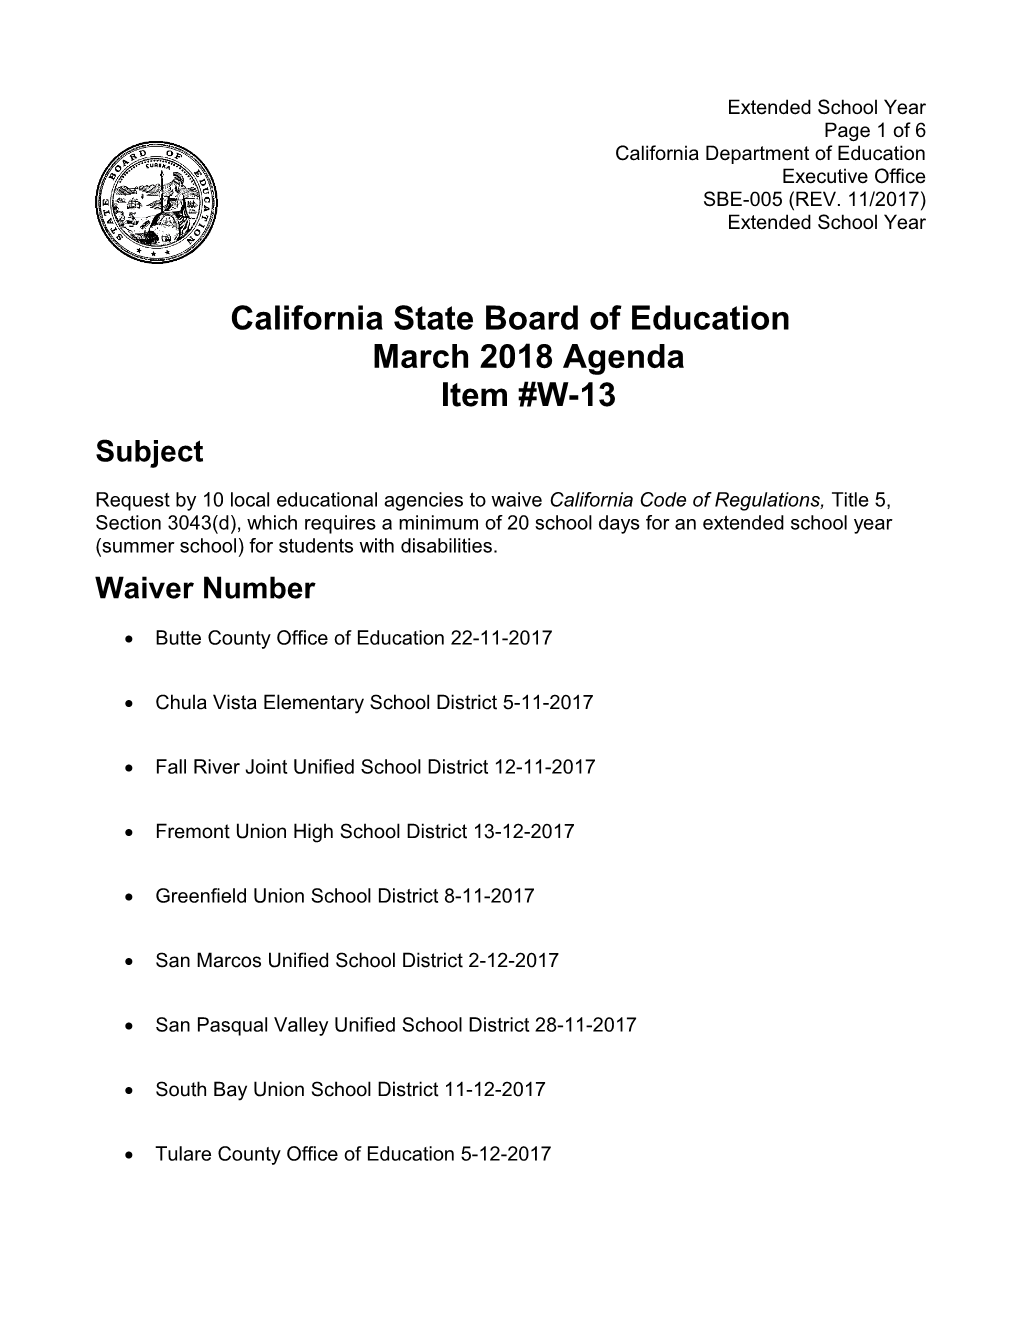 March 2018 Waiver Item W-13 - Meeting Agendas (CA State Board of Education)